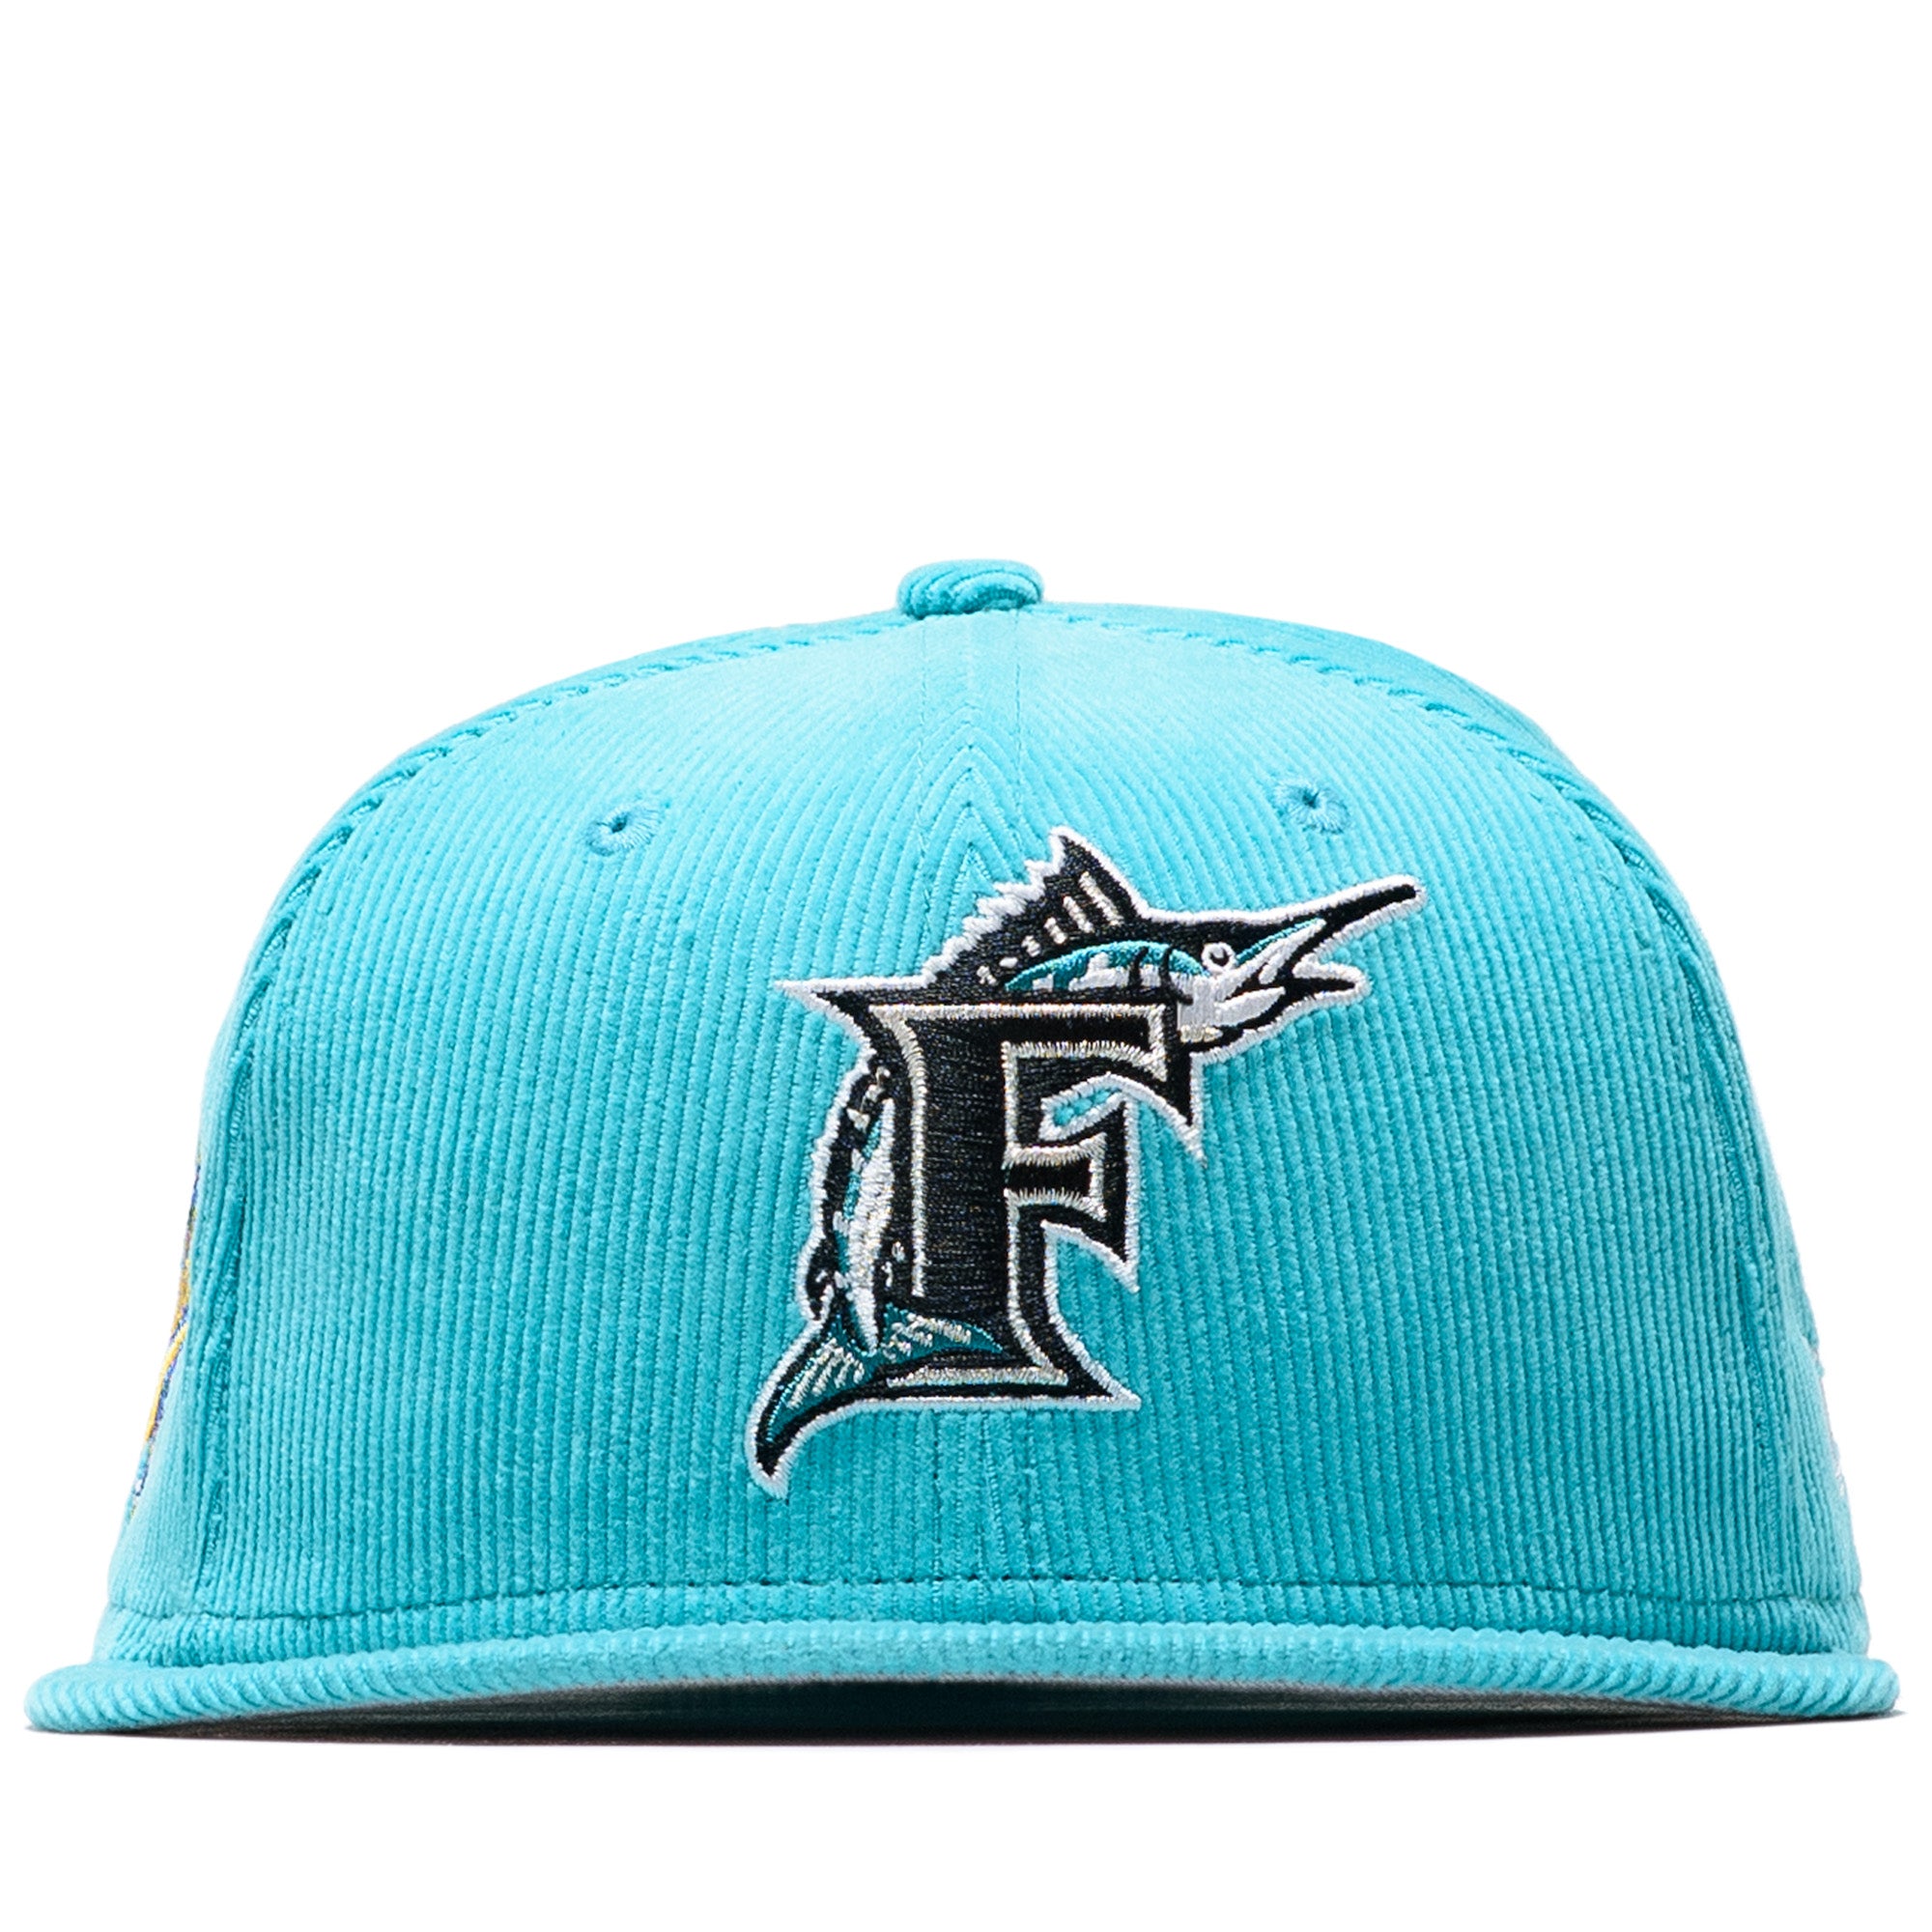 New Era Miami Marlins Cooperstown Corduroy 59FIFTY Fitted Hat - Teal, Size 7 1/4 by Sneaker Politics